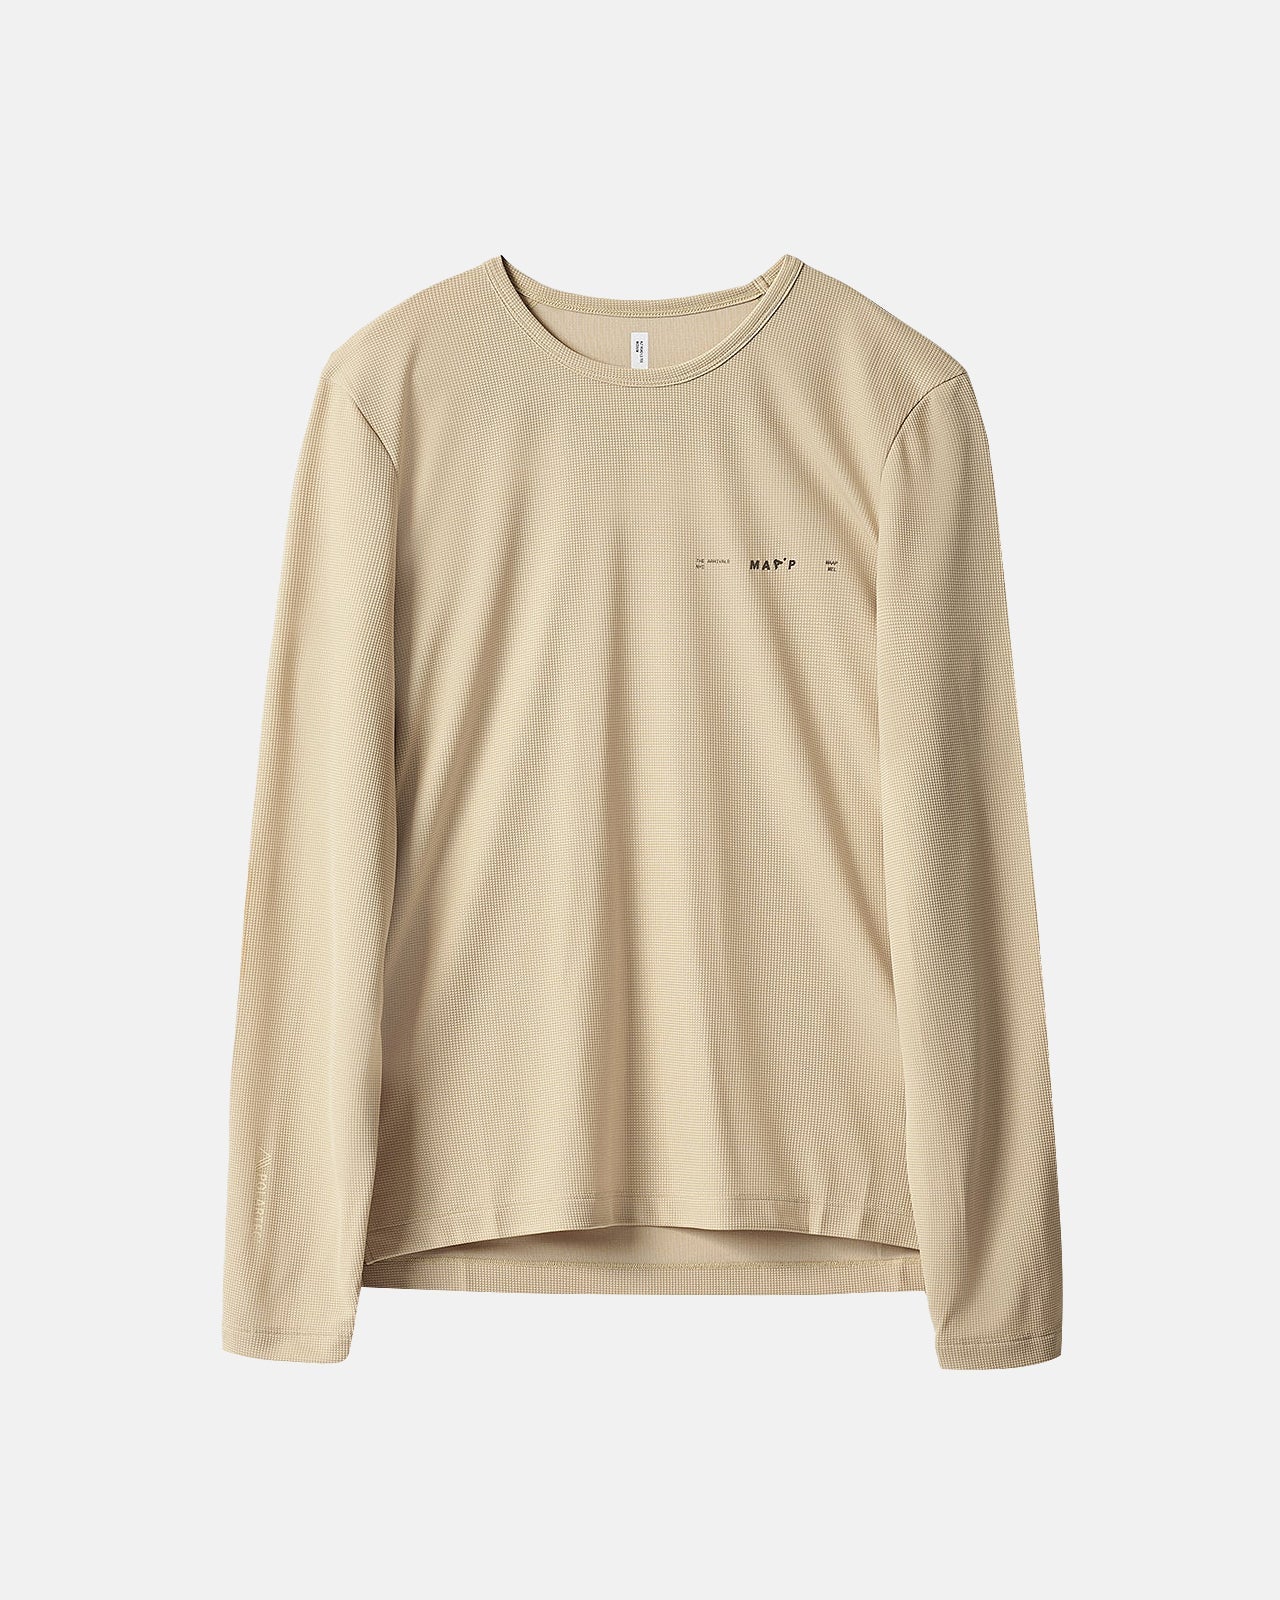 x The Arrivals LS Tee - Sand